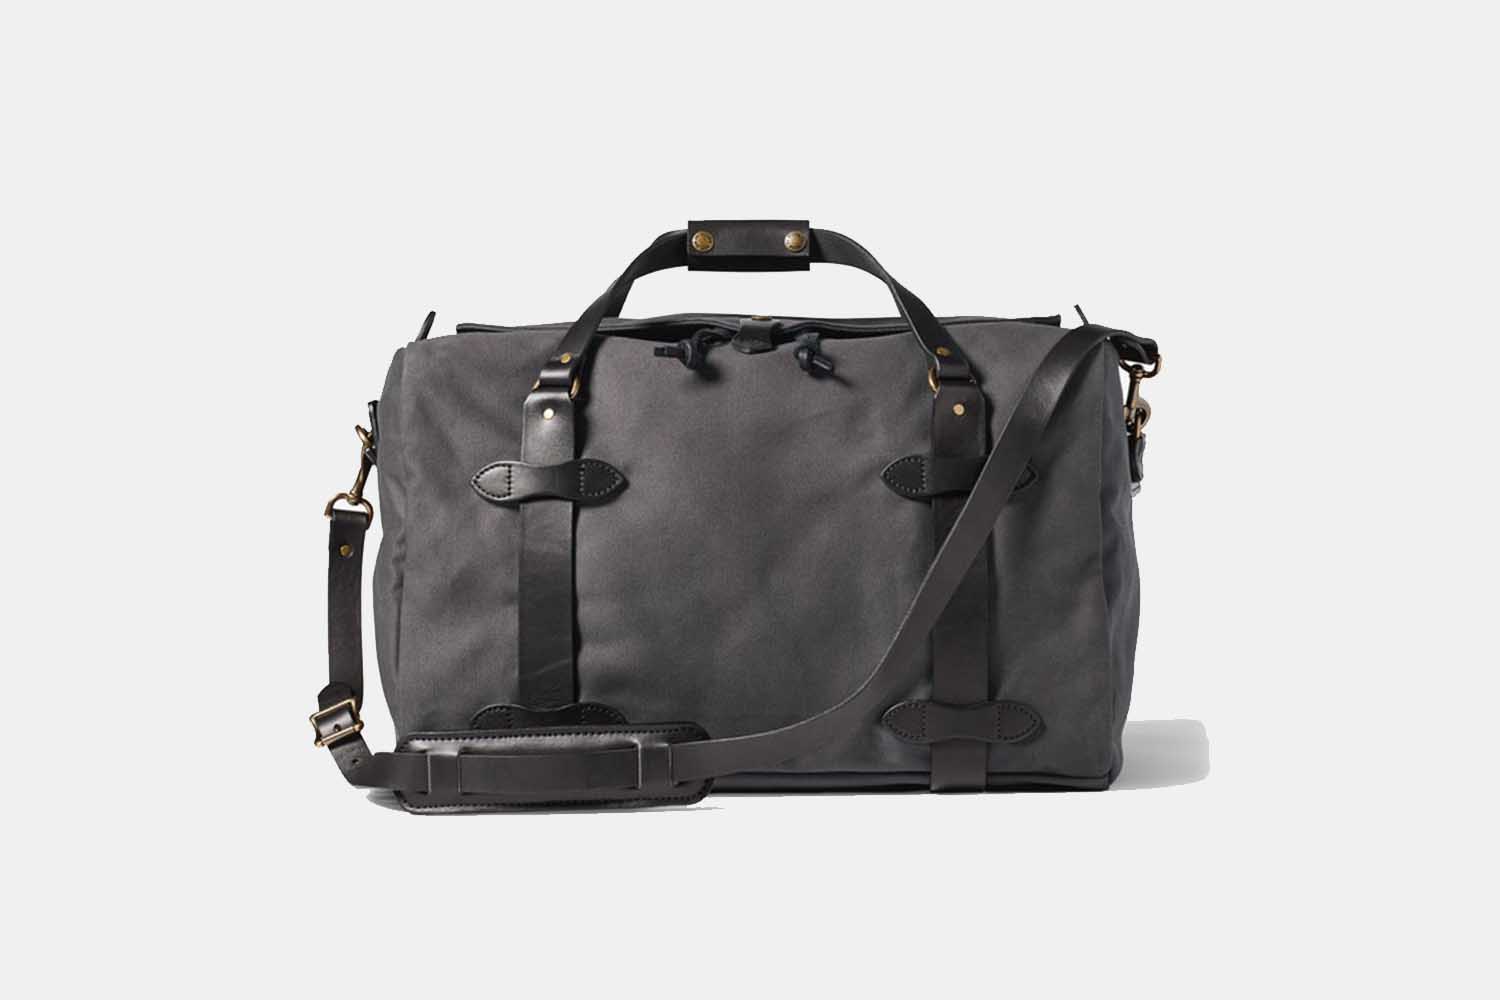 Save $200 On This Indestructible Filson Duffel